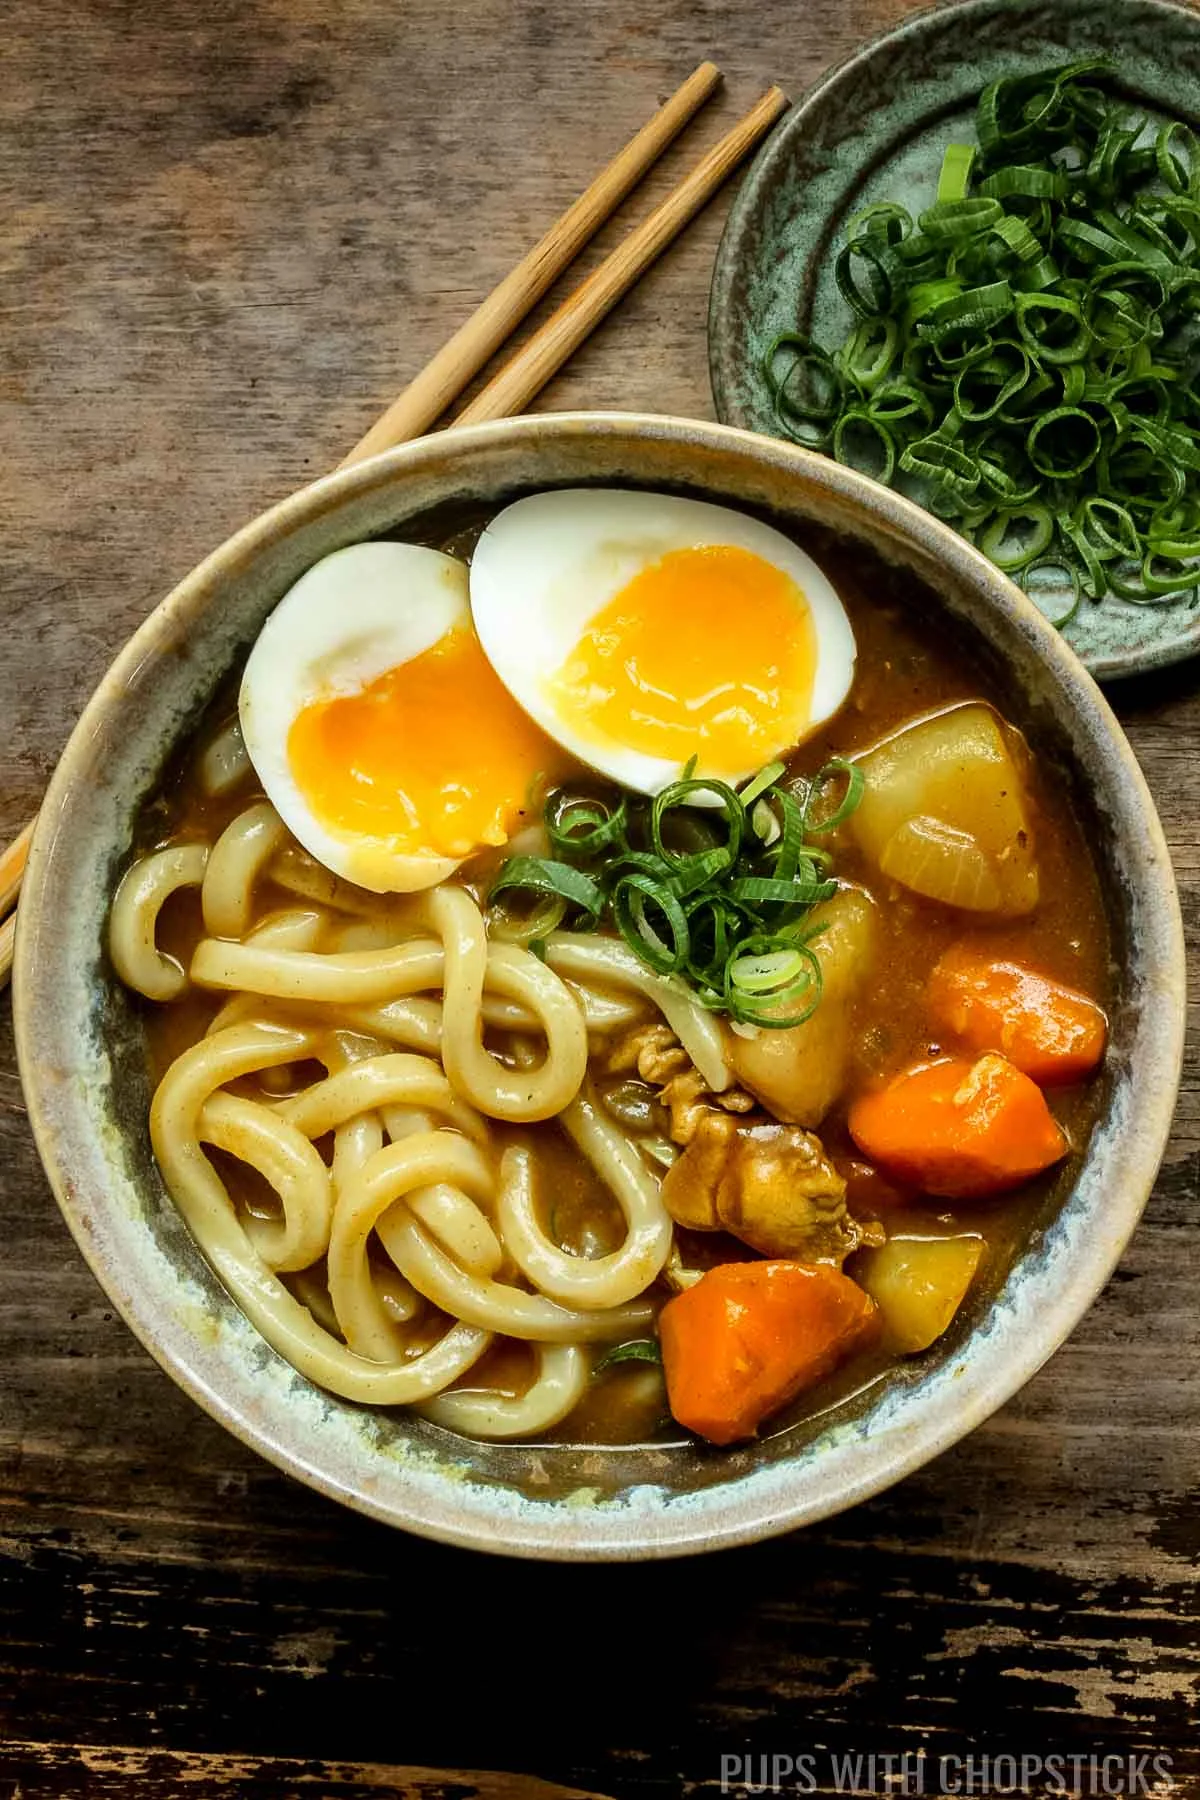 Japanese curry udon served with soft boiled egg and green onions on the side